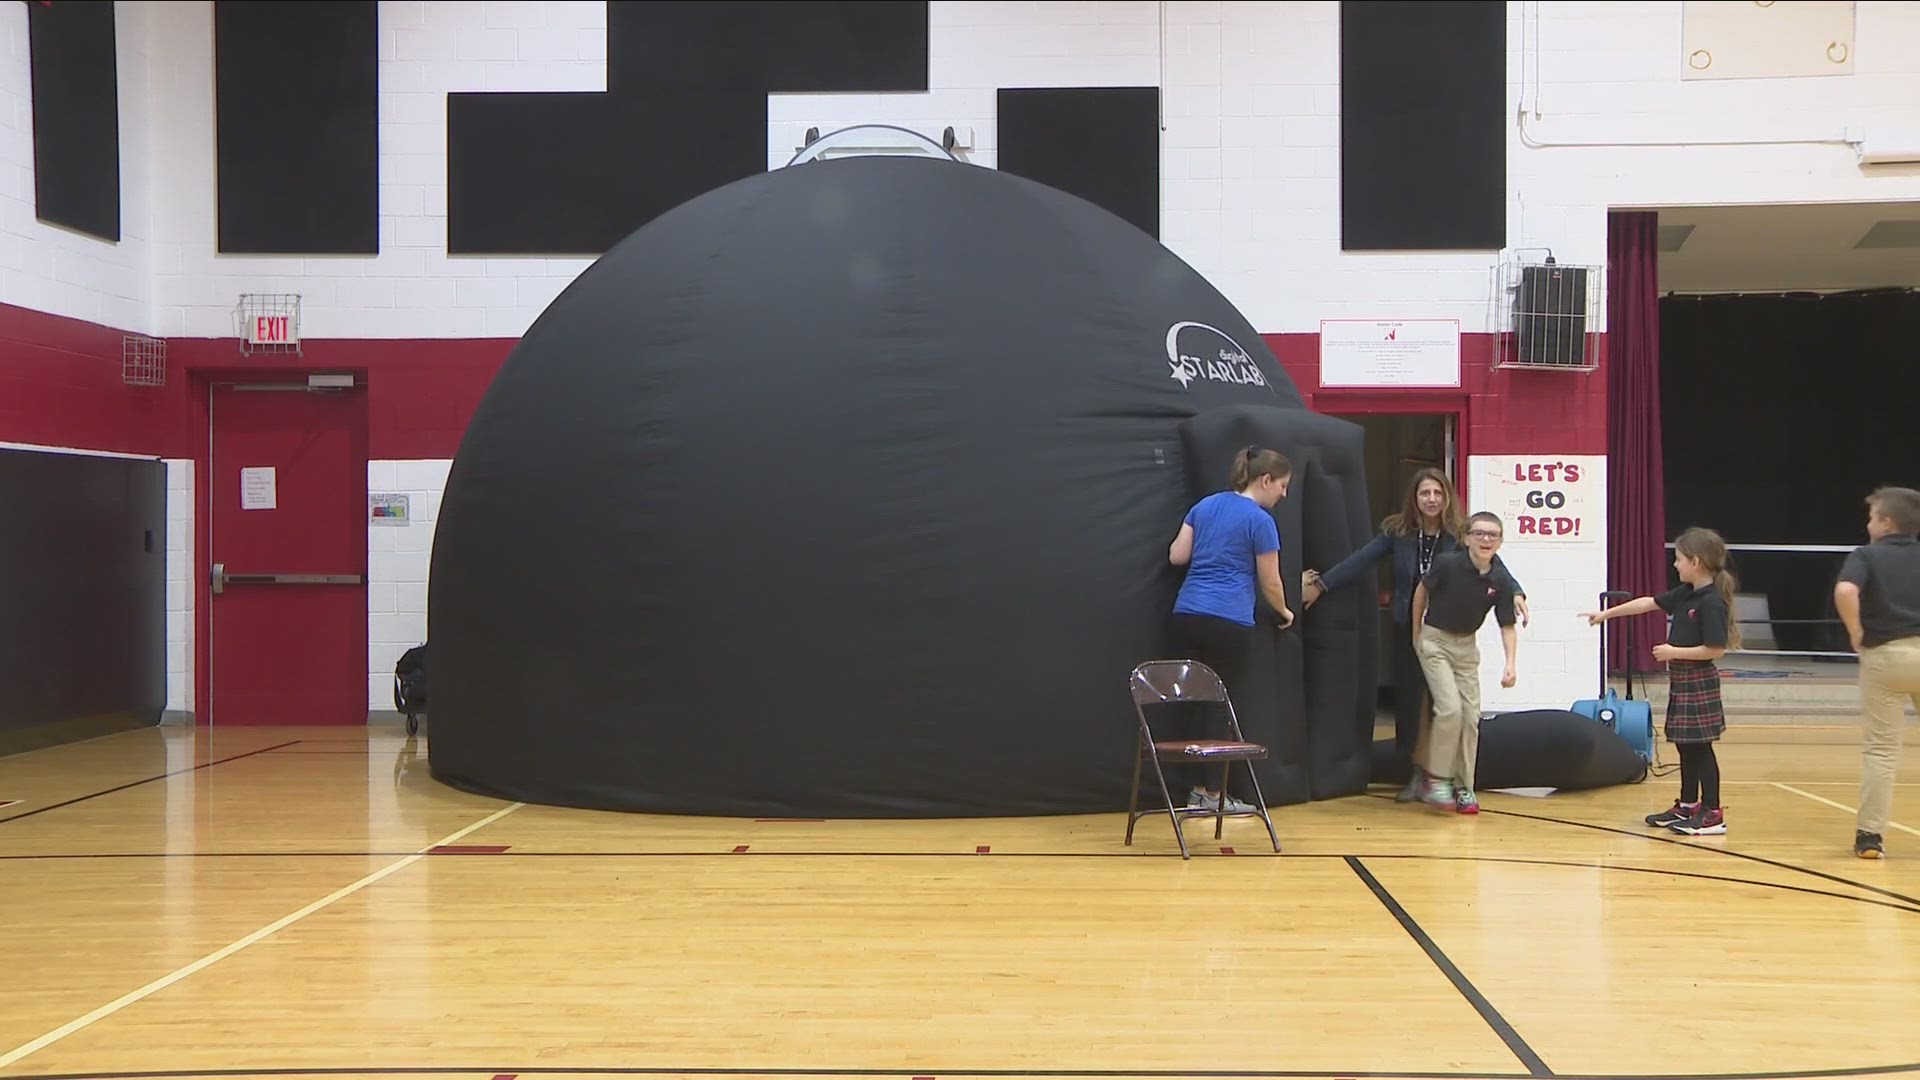 Nativity of Our Lord School has a digital planetarium for students